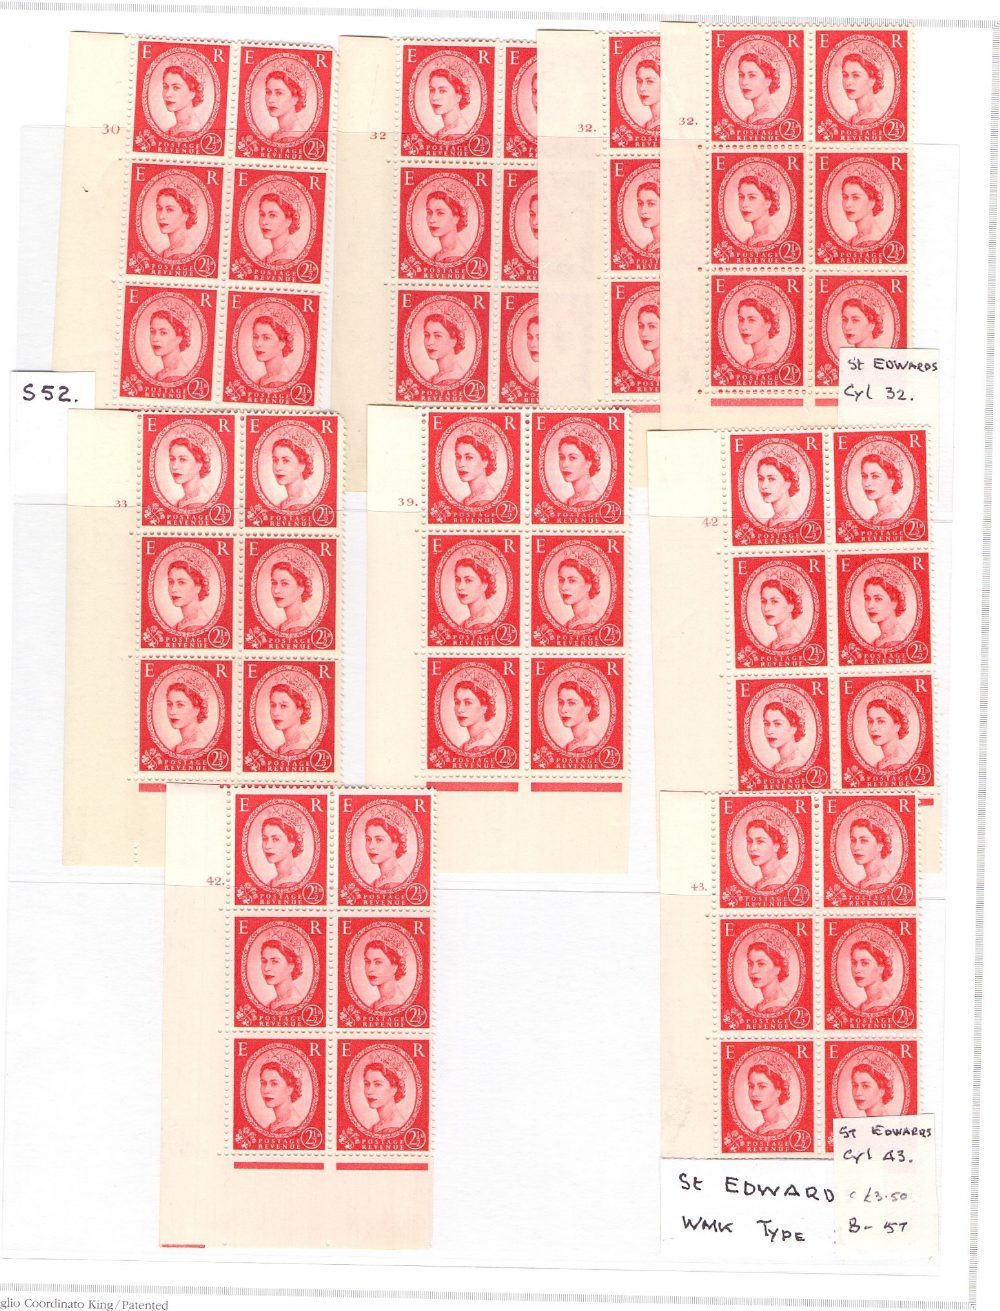 GREAT BRITAIN STAMPS : Wilding Collection, mint cylinder blocks, coils, singles, - Image 6 of 18